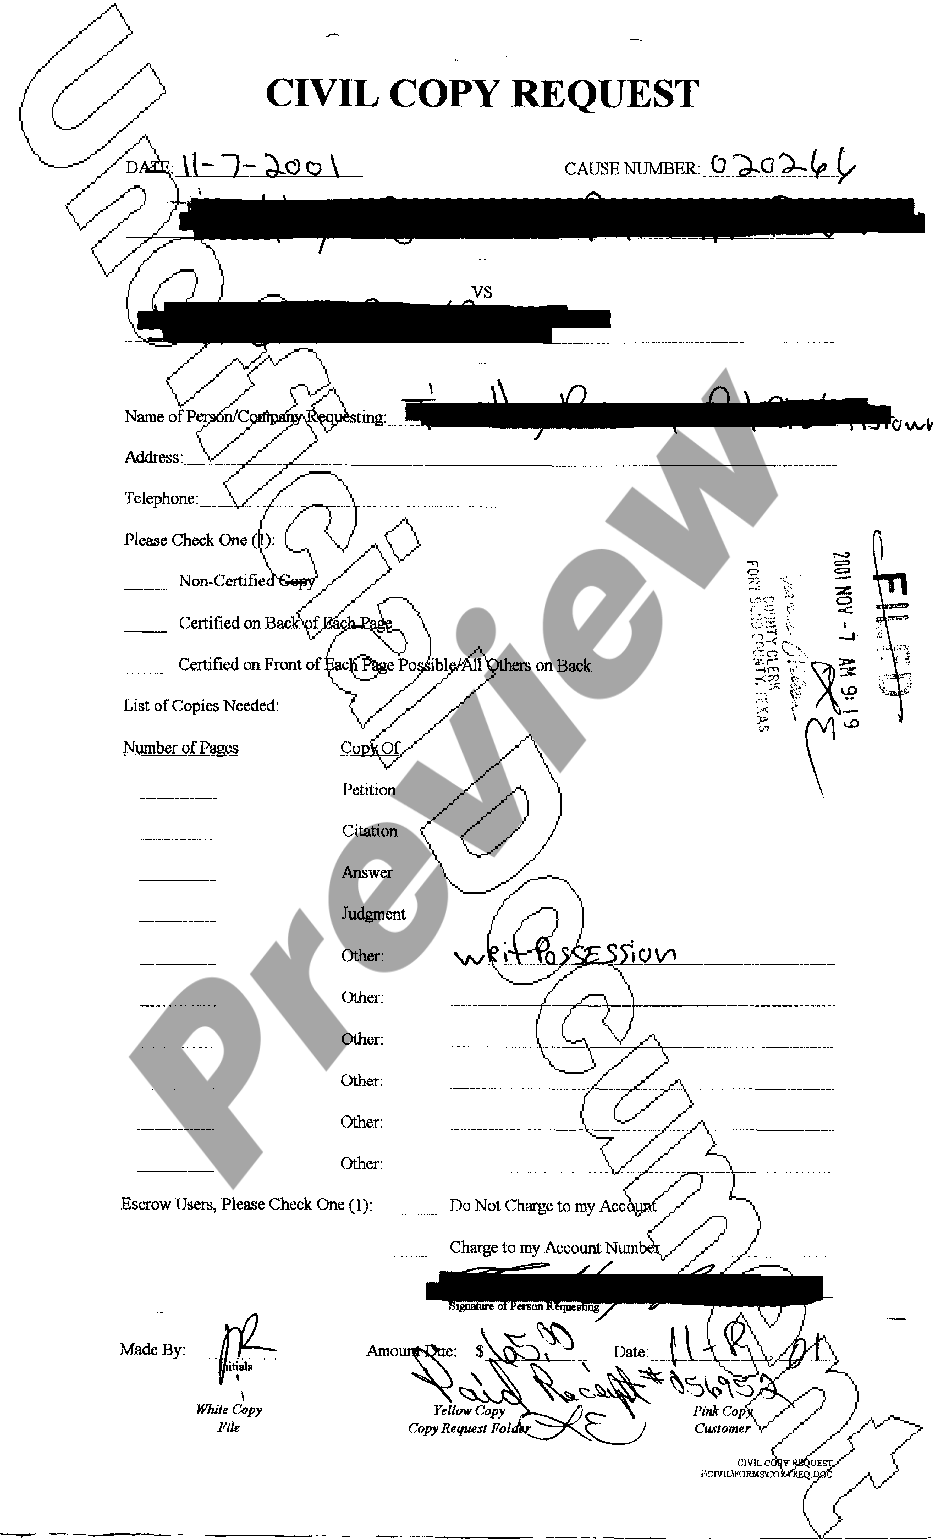 mcallen-texas-writ-of-possession-texas-writ-of-possession-us-legal